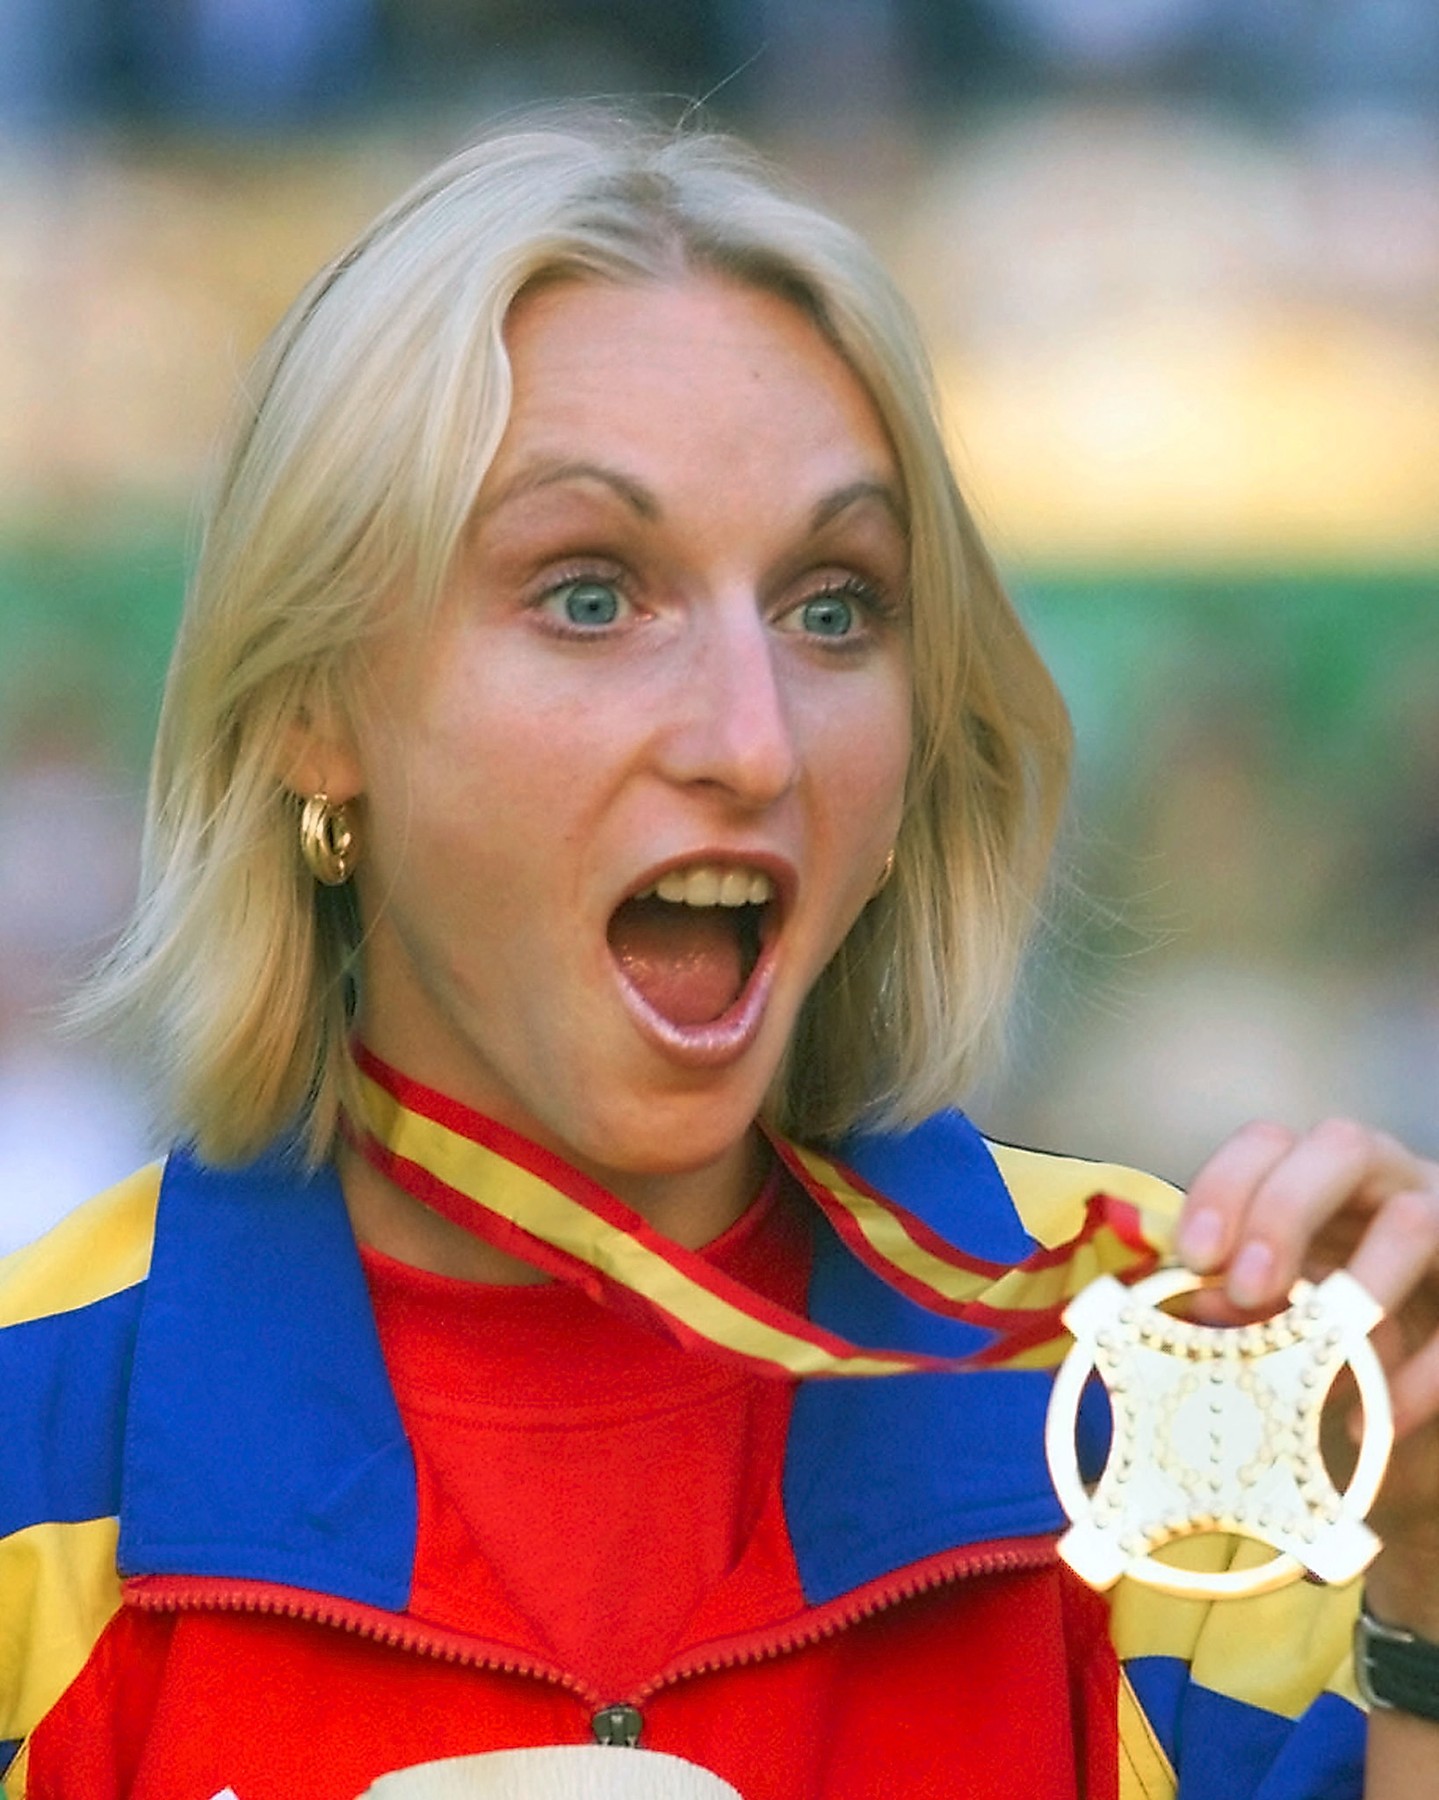 Romanian 5,000m world champion Gabriela Szabo of Romania displays her gold medal during the victory ceremony at the World Athletics Championships in Seville 28 August 1999. (ELECTRONIC IMAGE),Image: 17447815, License: Rights-managed, Restrictions: , Model Release: no, Credit line: Profimedia